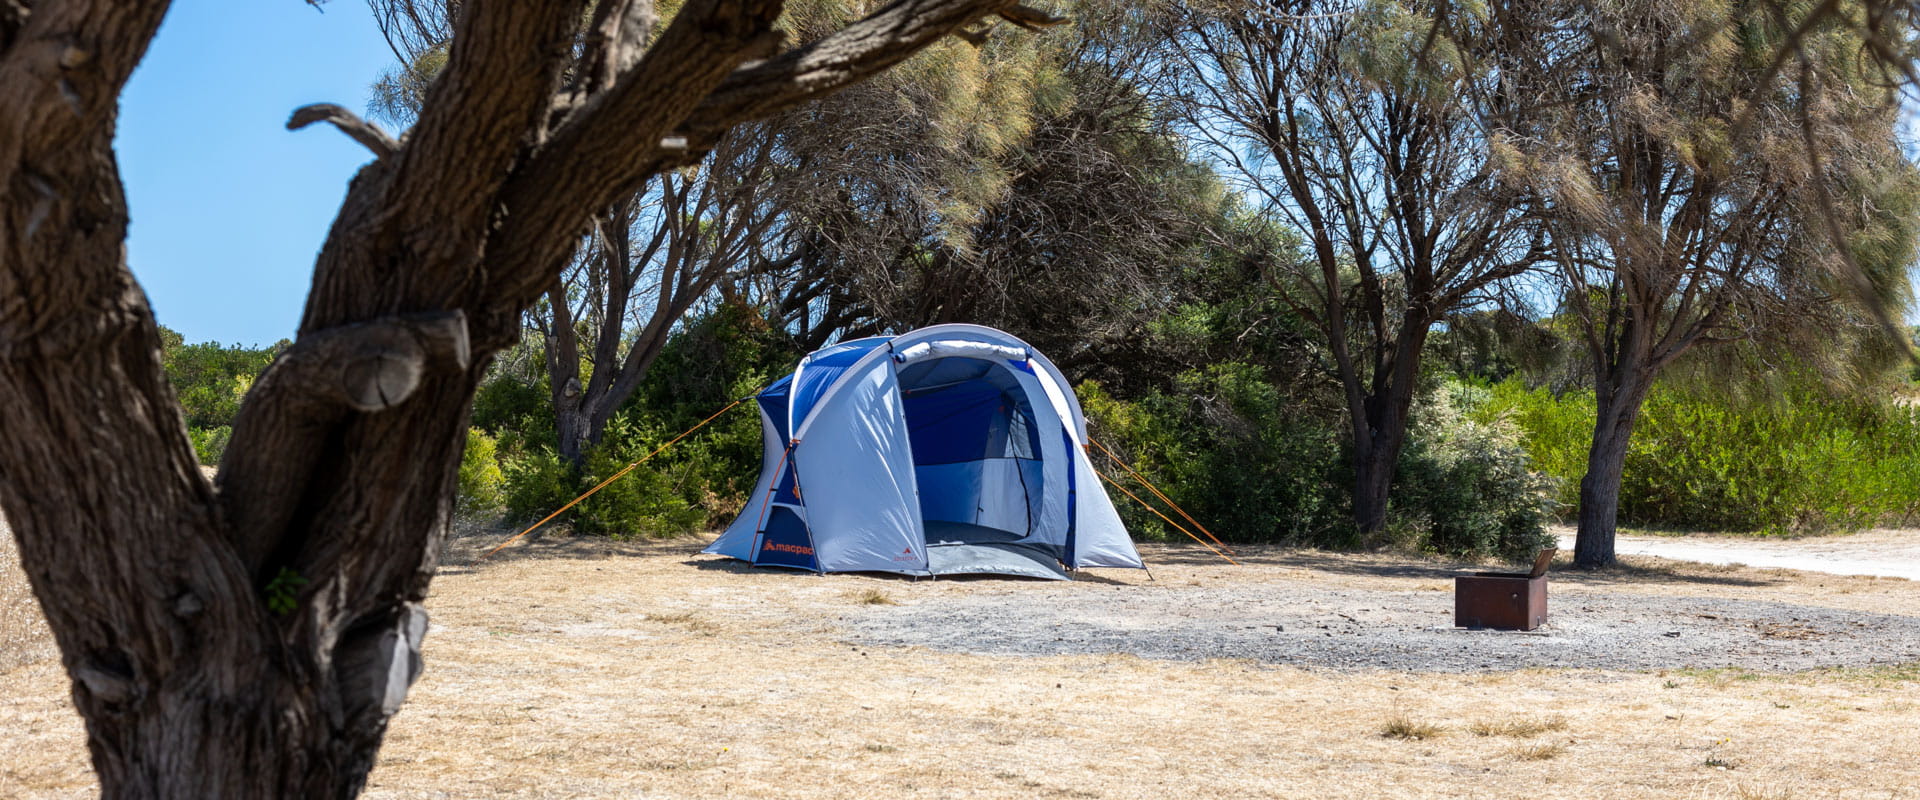 An open camping tent sits under the shade of surrounding trees and bushes with a small campfire area in front.